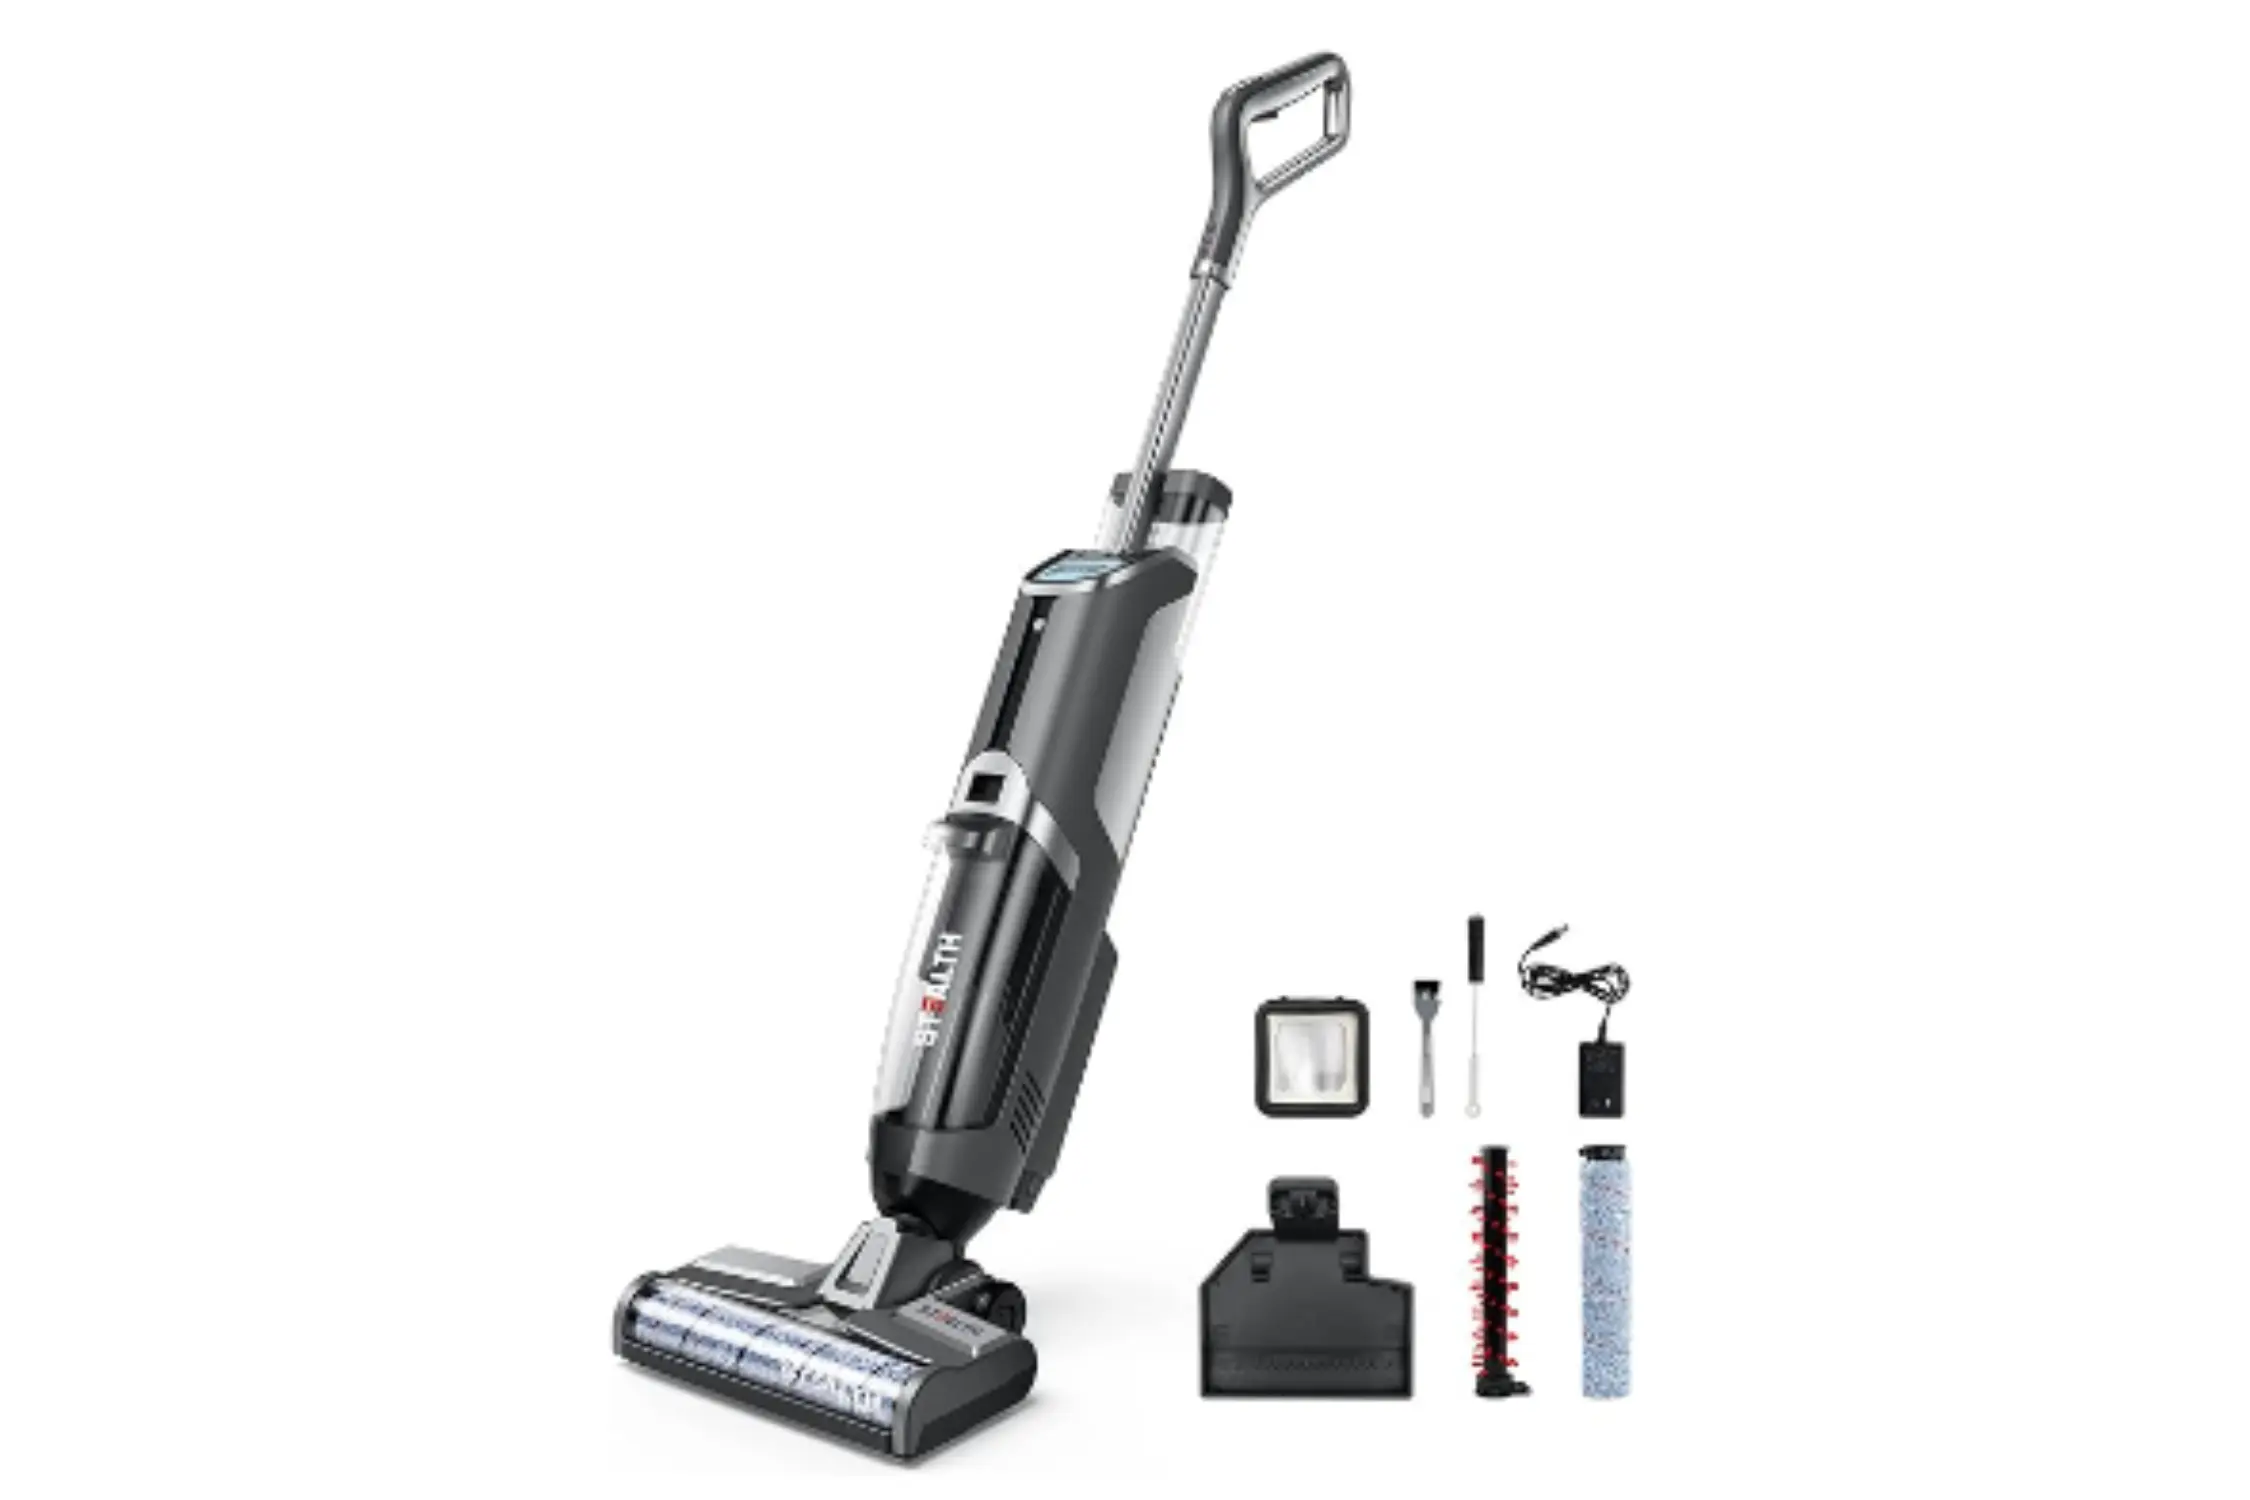 How Wet and Dry Vacuum Cleaner Work